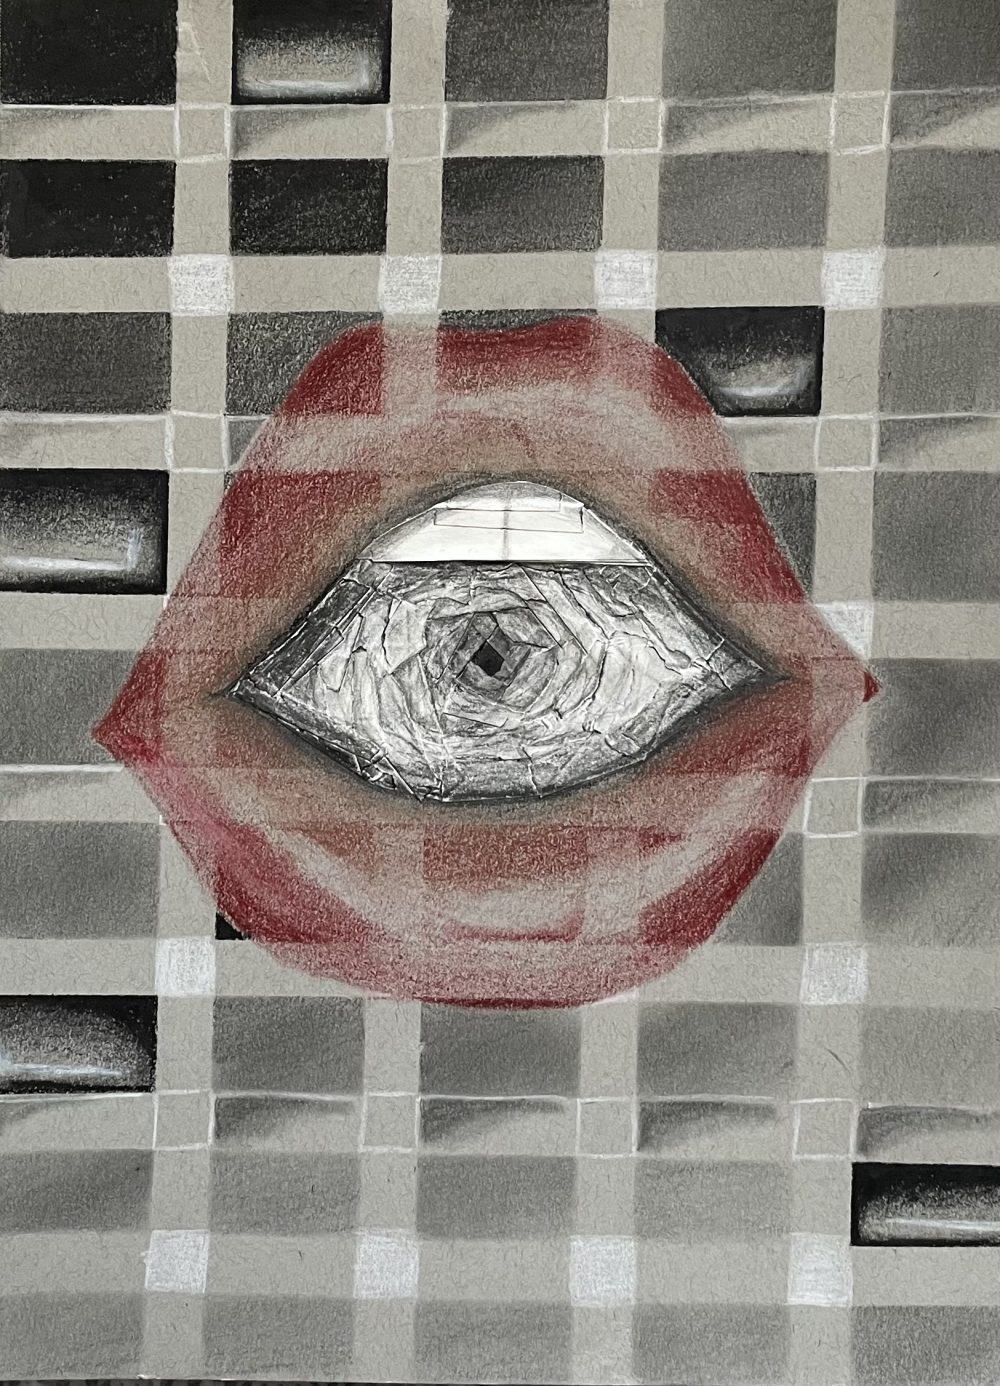 A drawing in black, white, and red. A pair of bright red lips is in the center with slight teeth showing. Inside the mouth is a spiral of tape descending into the mouth. Covering the whole image is gridded lines through the lips. In some squares made by the grid is black squares, with white pencil lining them to make them look shiny.